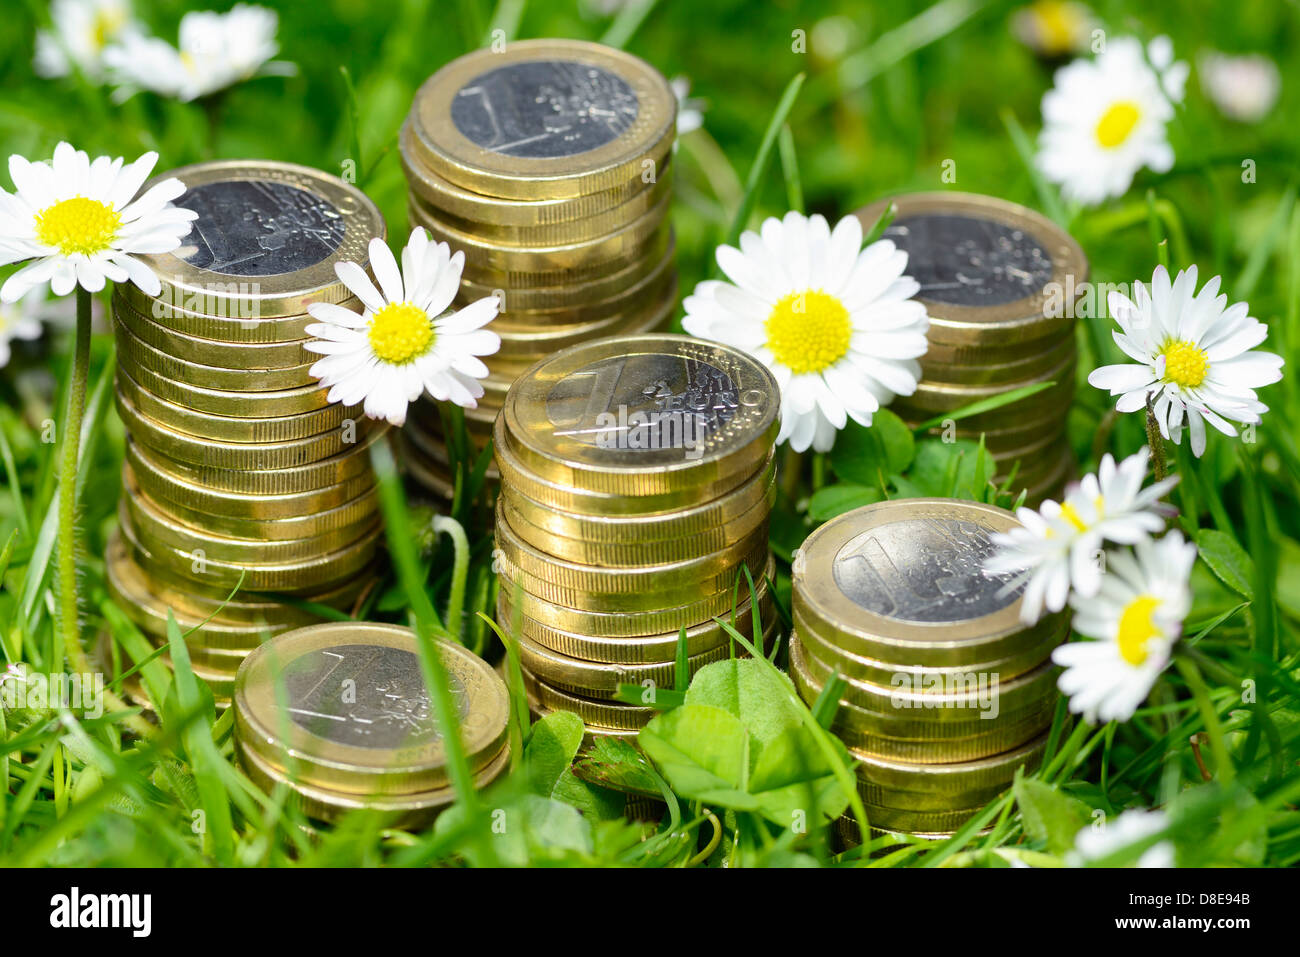 Piles of coins in the grass, investment Stock Photo